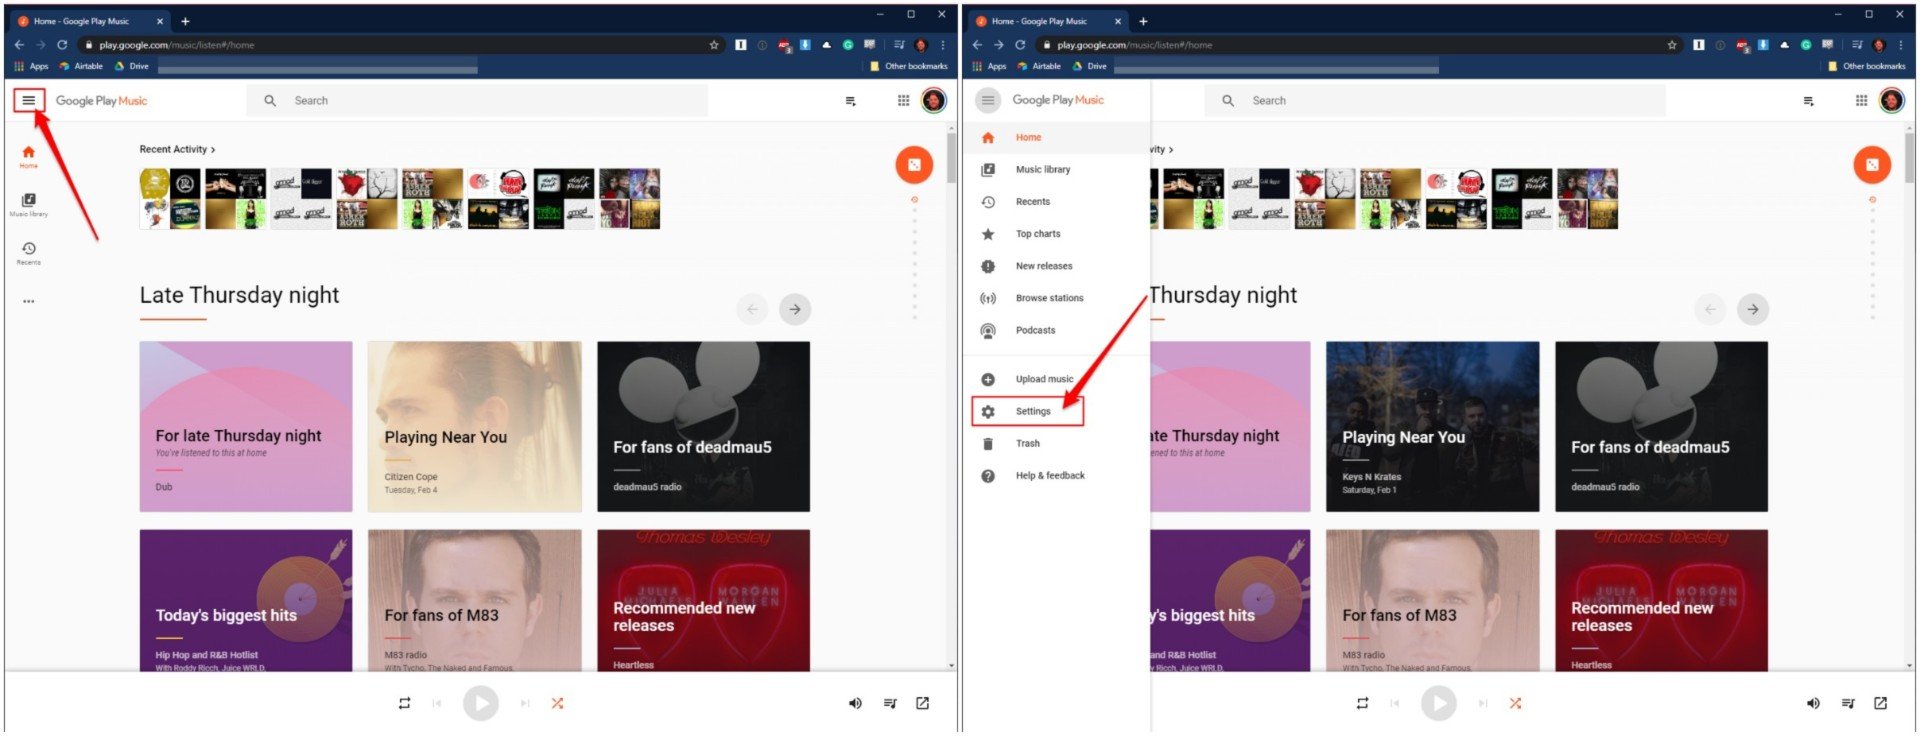 how to cancel google play music